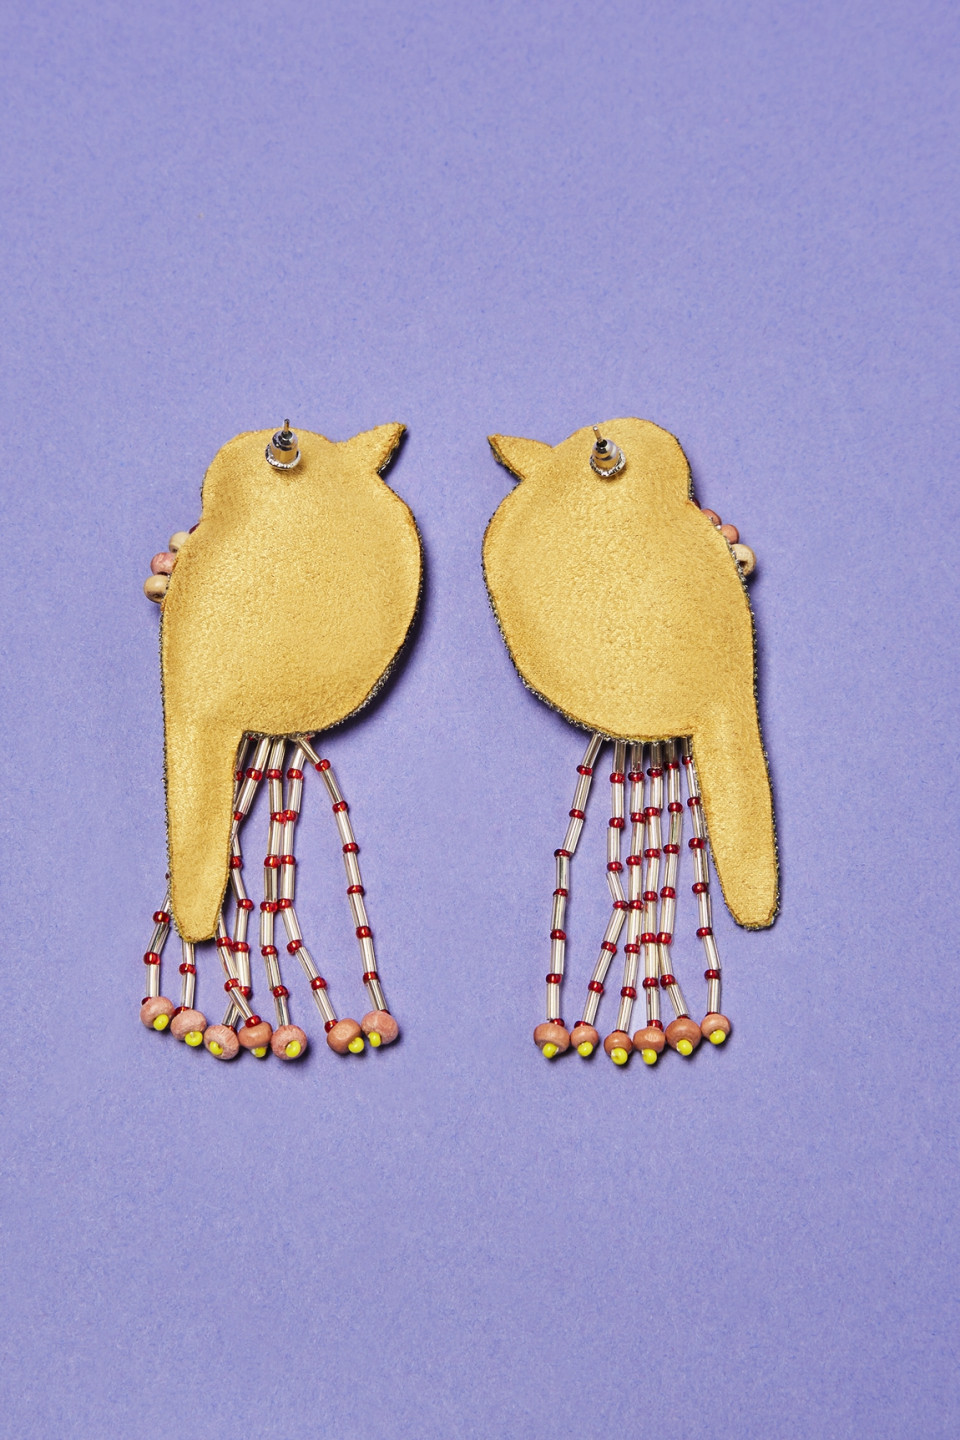 Update more than 97 bird earrings india latest